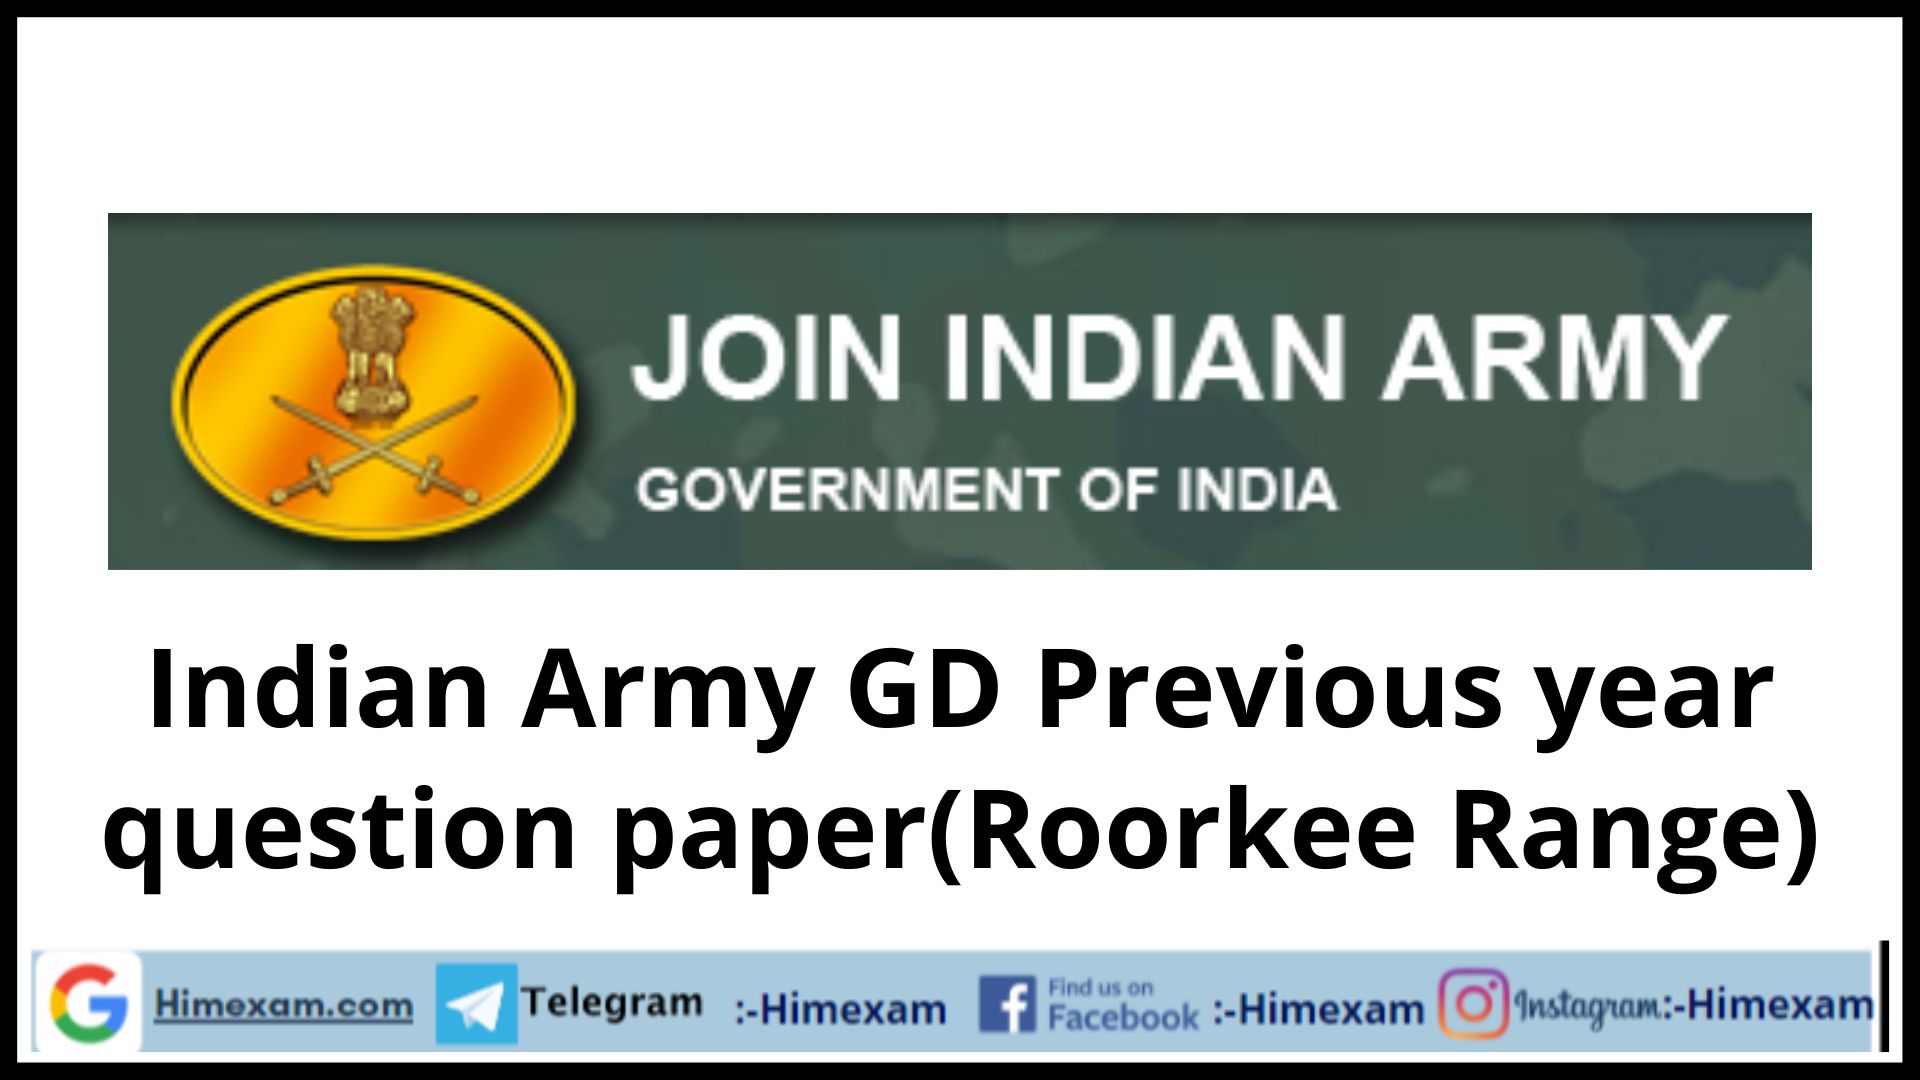 Indian Army GD Previous year question paper(Roorkee Range)